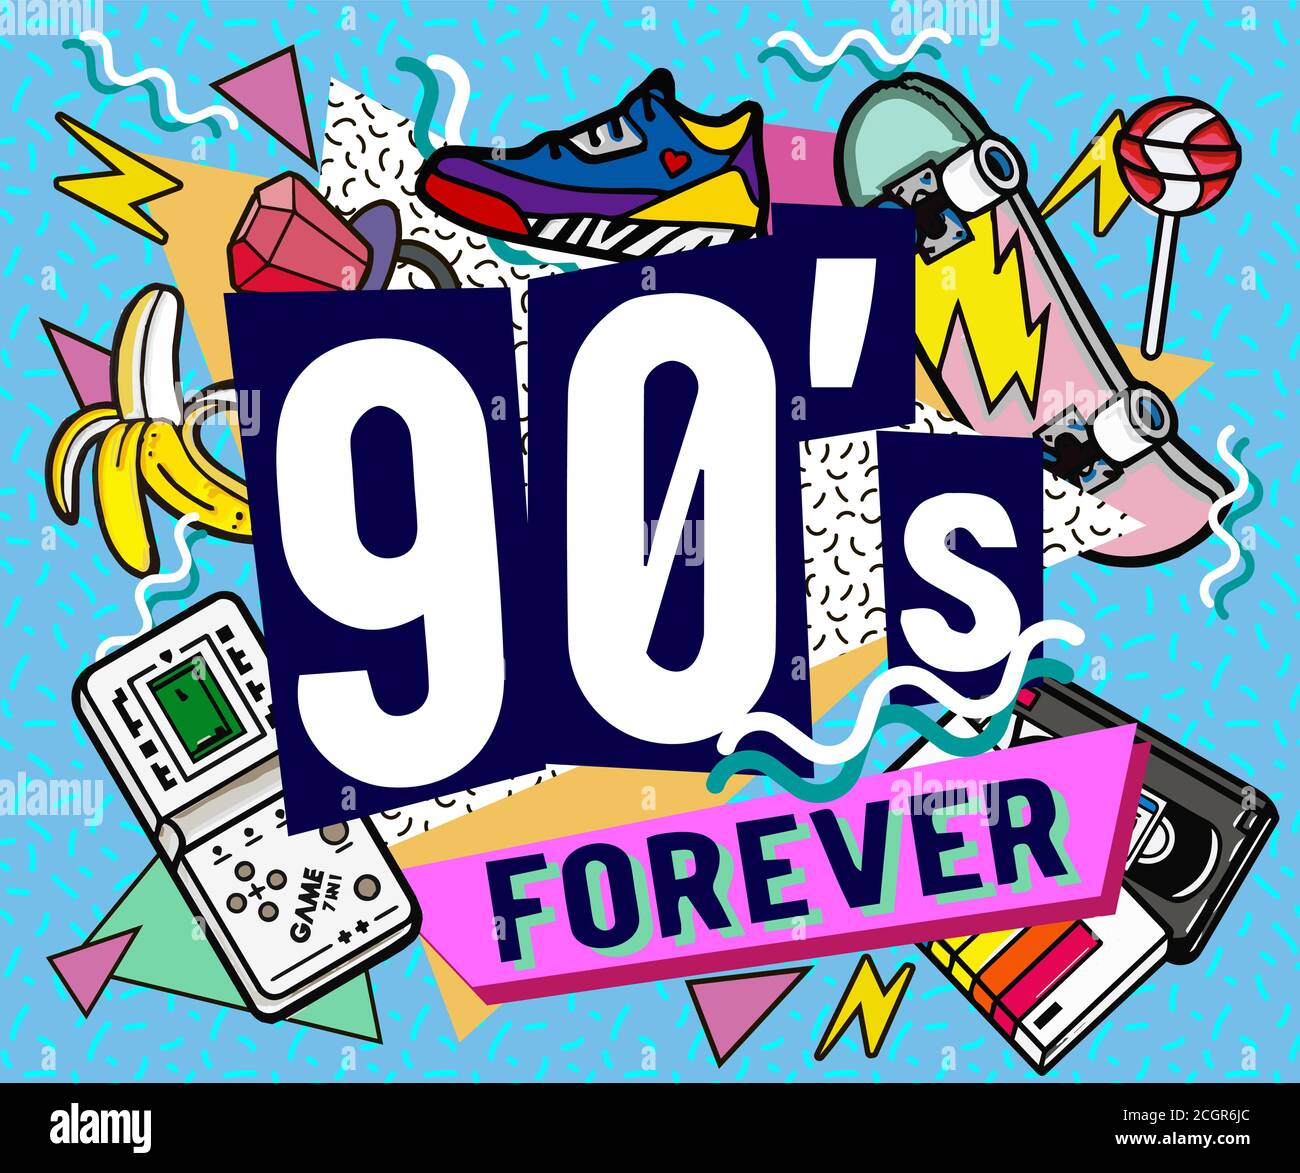 banners in trendy 80s-90s memphis style. with old-fashioned retro stuff with a game, vhs cassette, skate, stick candy, sneakers and an old audio casse Stock Vector